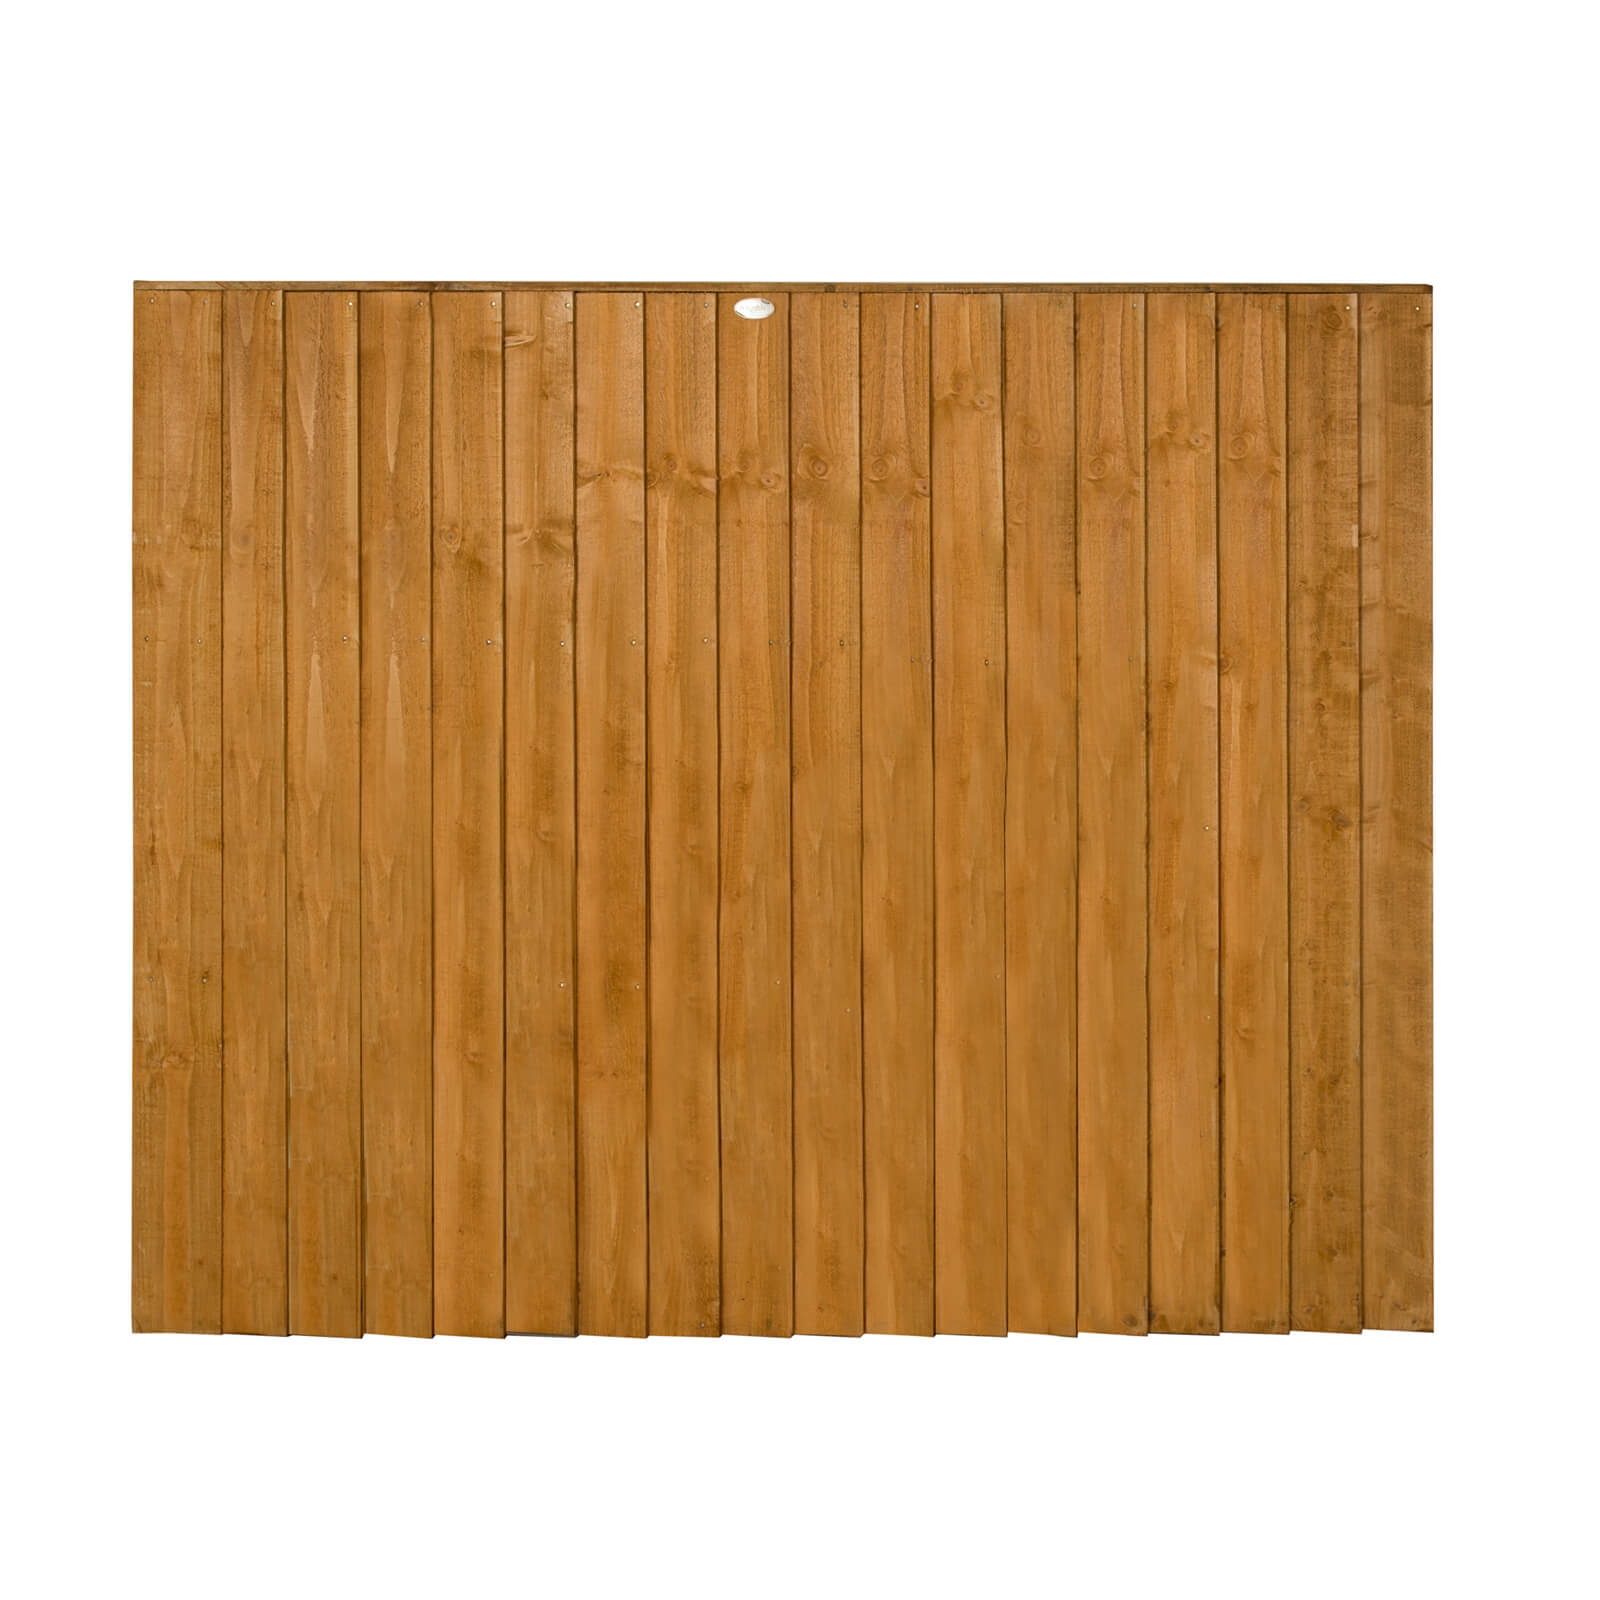 Forest Featherdge Dip Treated Fence Panel - 5ft - Pack of 5